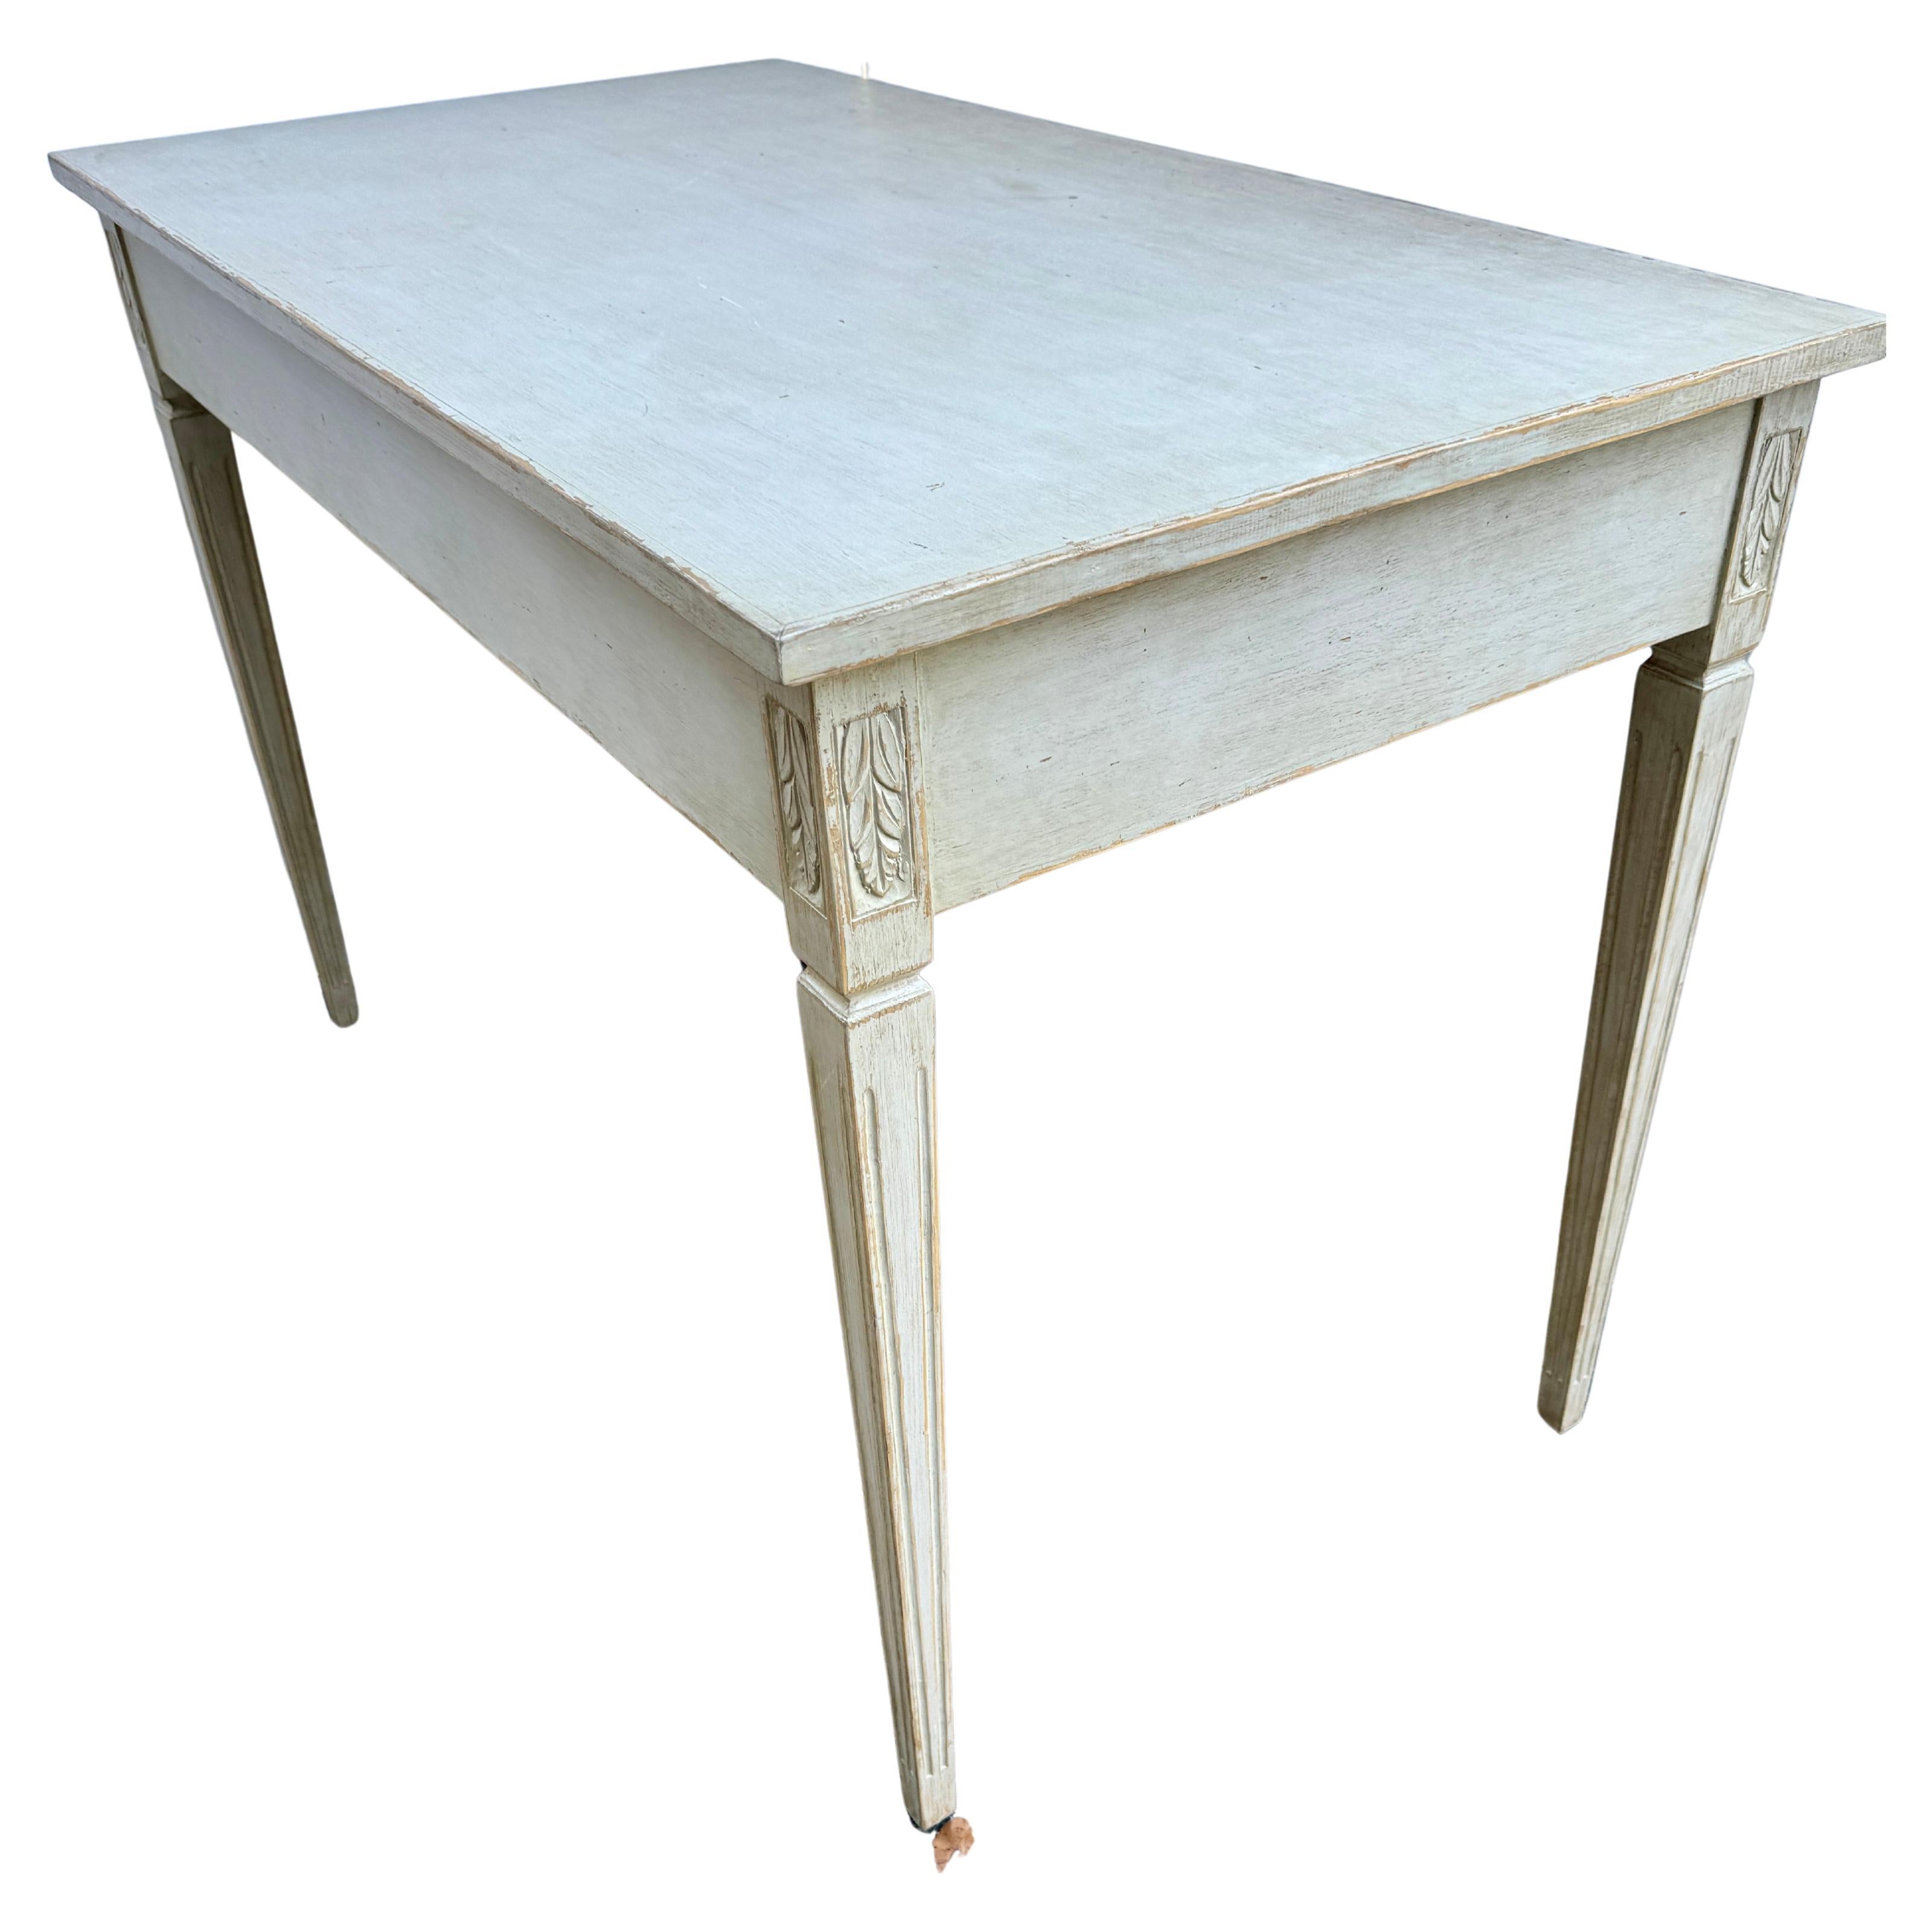 Hand-Crafted Swedish Gustavian Style Writing Desk With Drawer